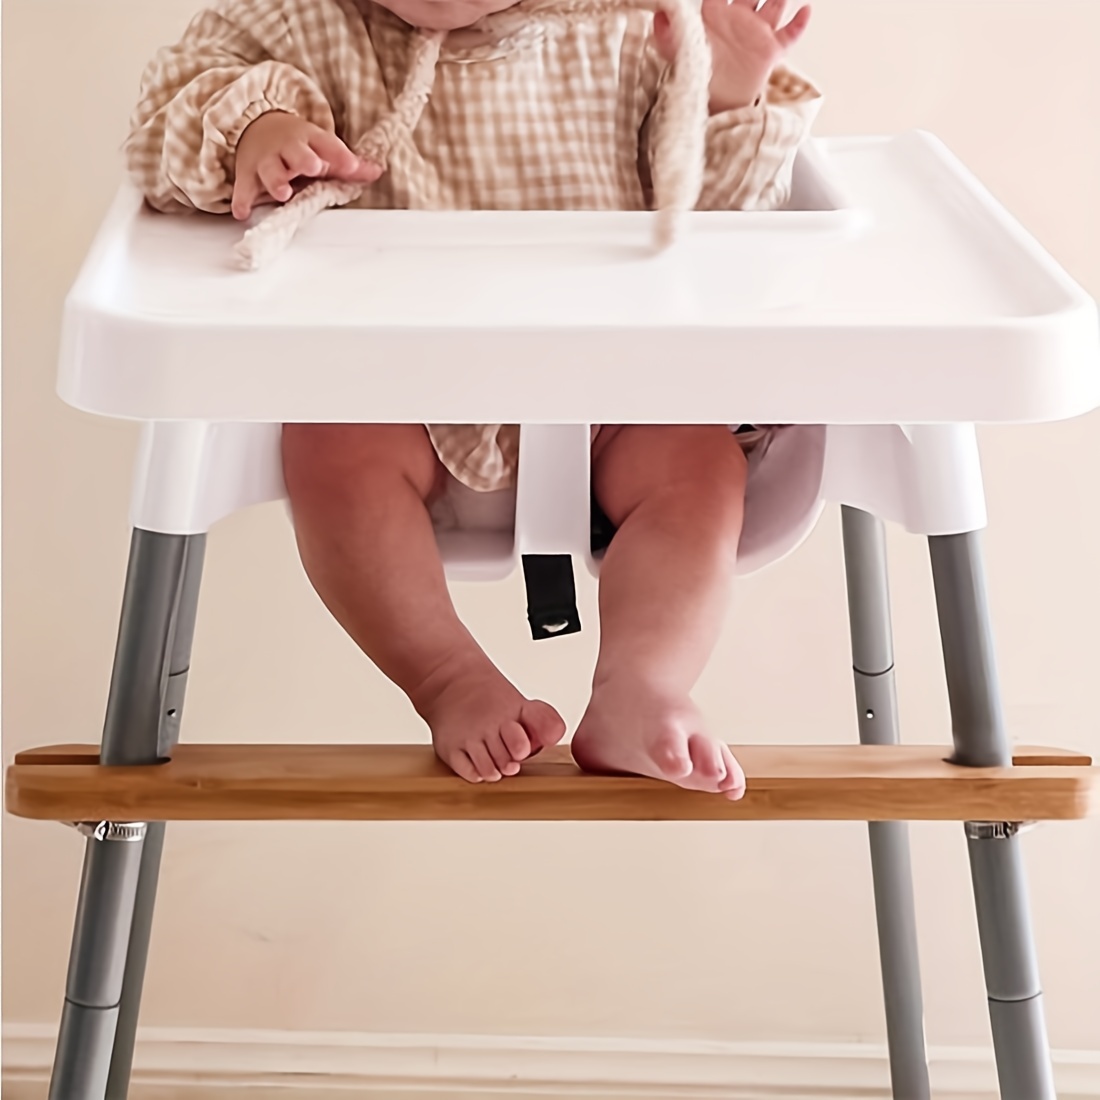 Baby Products Online - Autuiontec high chair footrest compatible